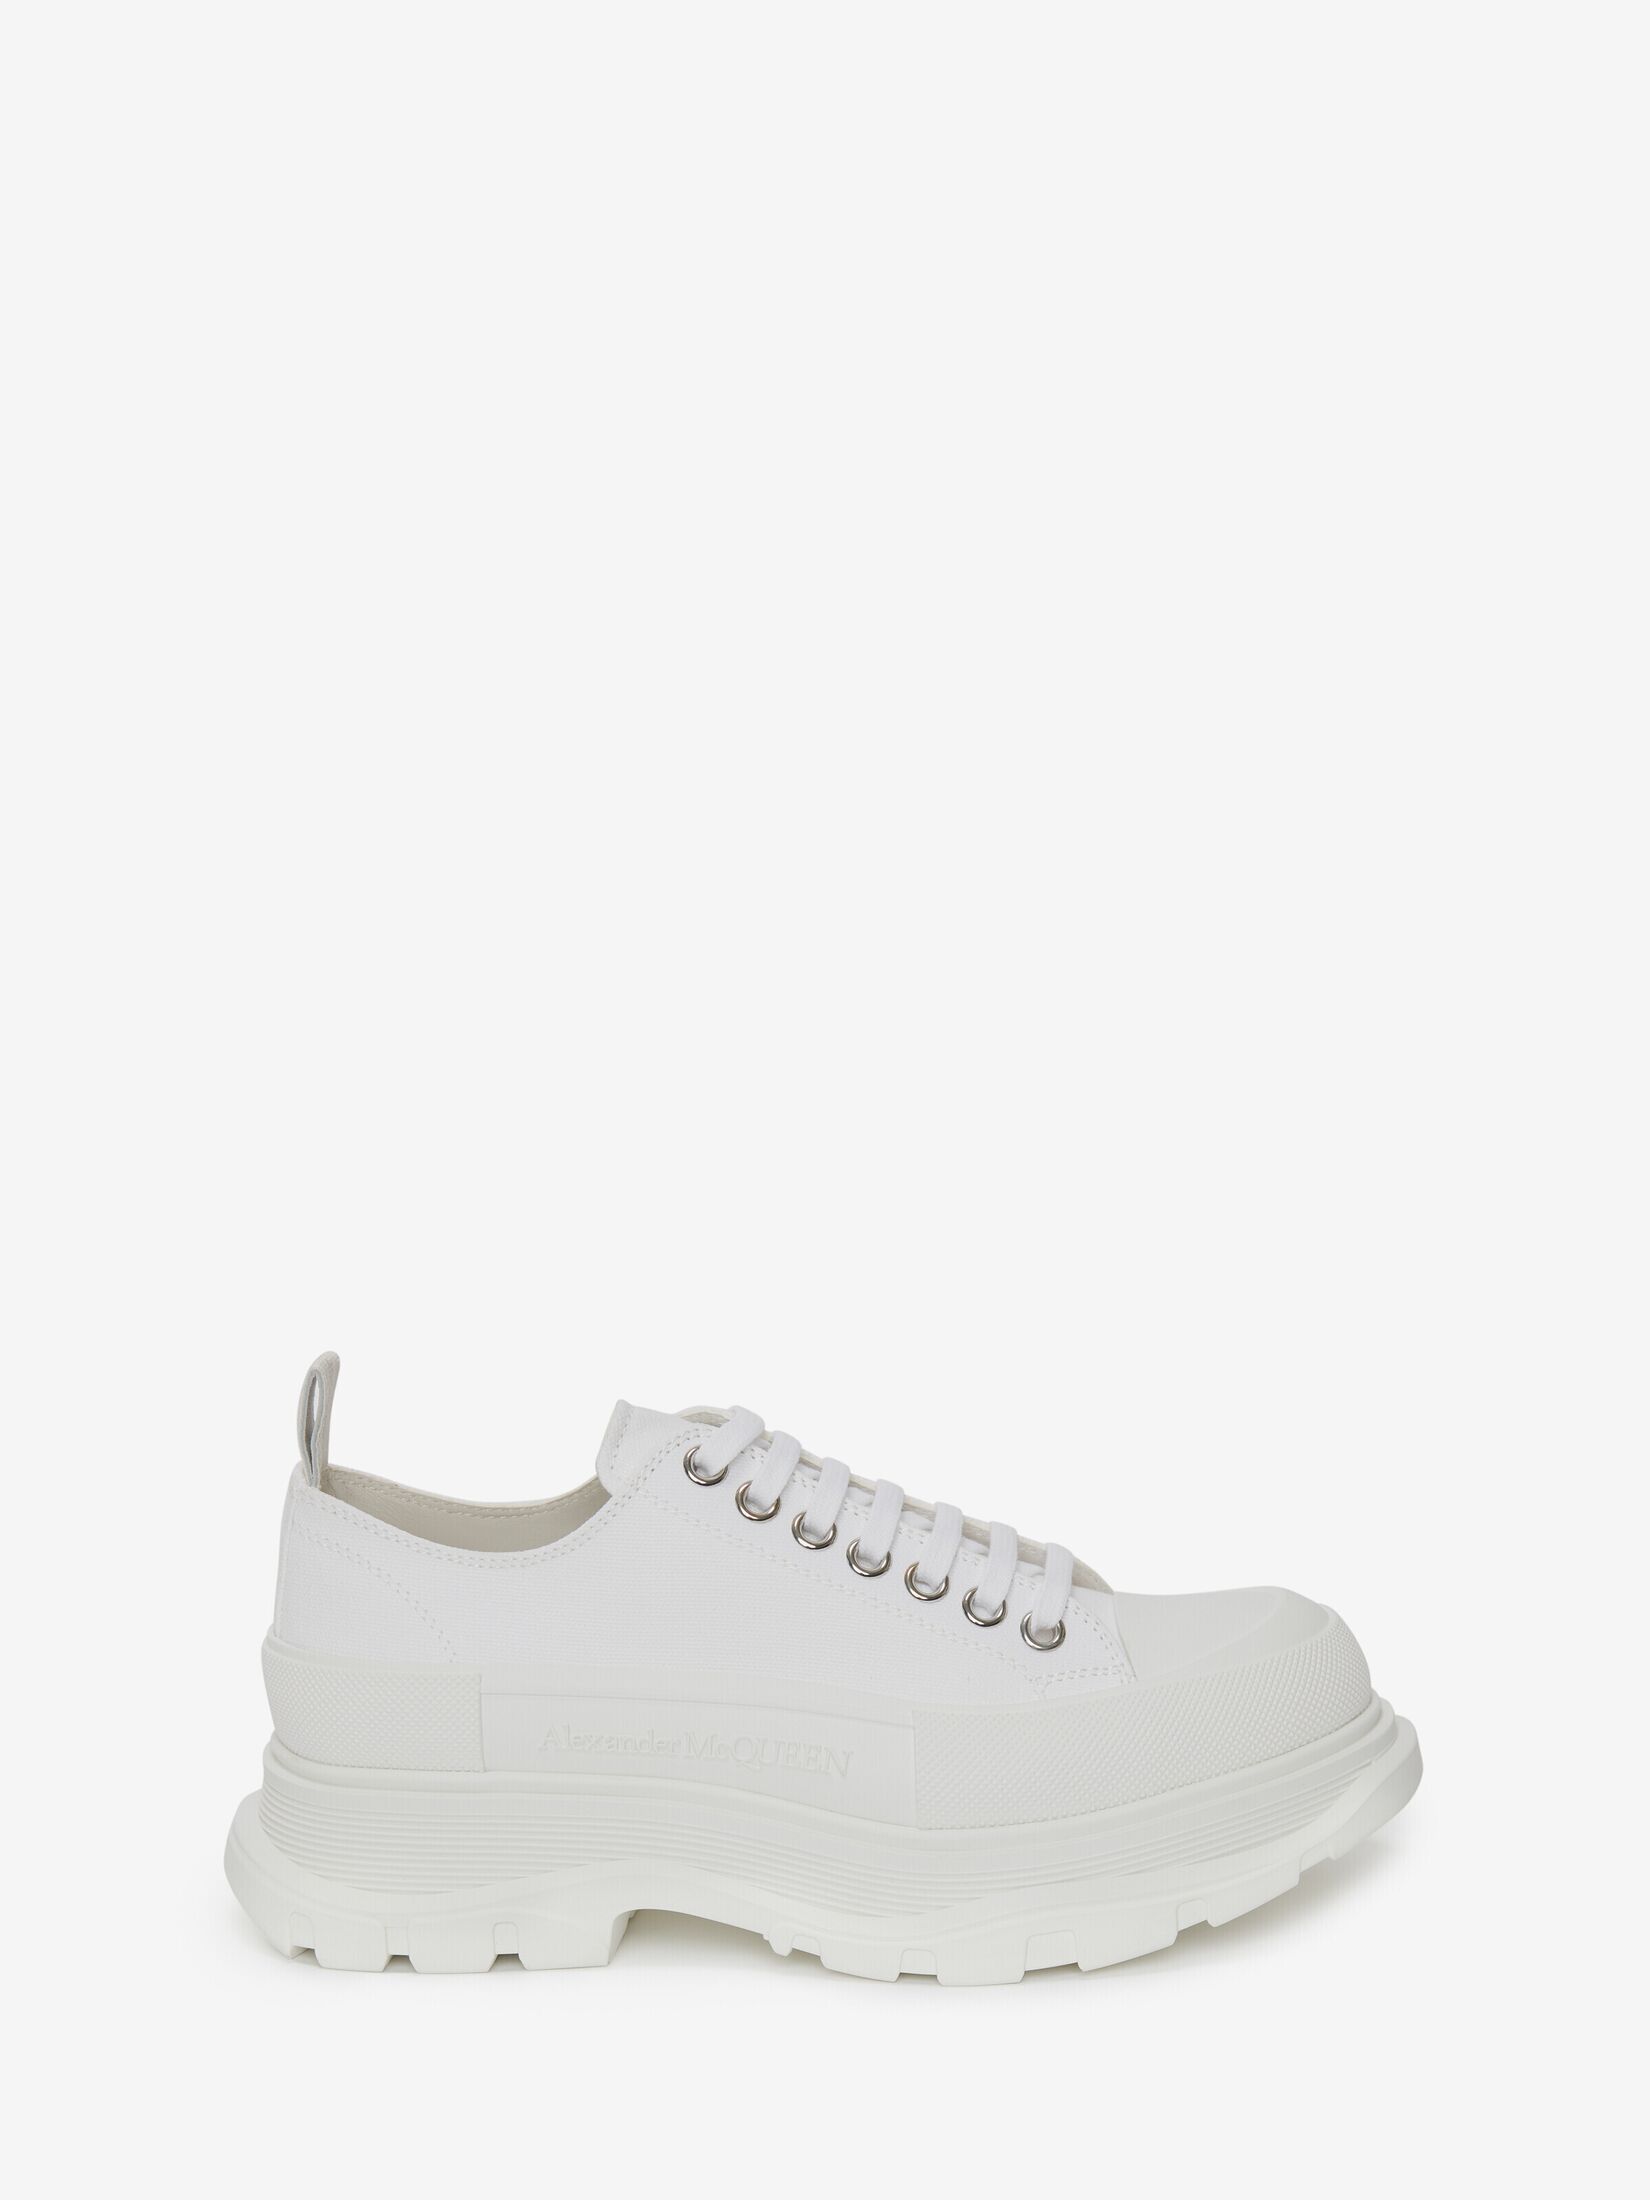 Tread Slick Lace Up in White | Alexander McQueen US